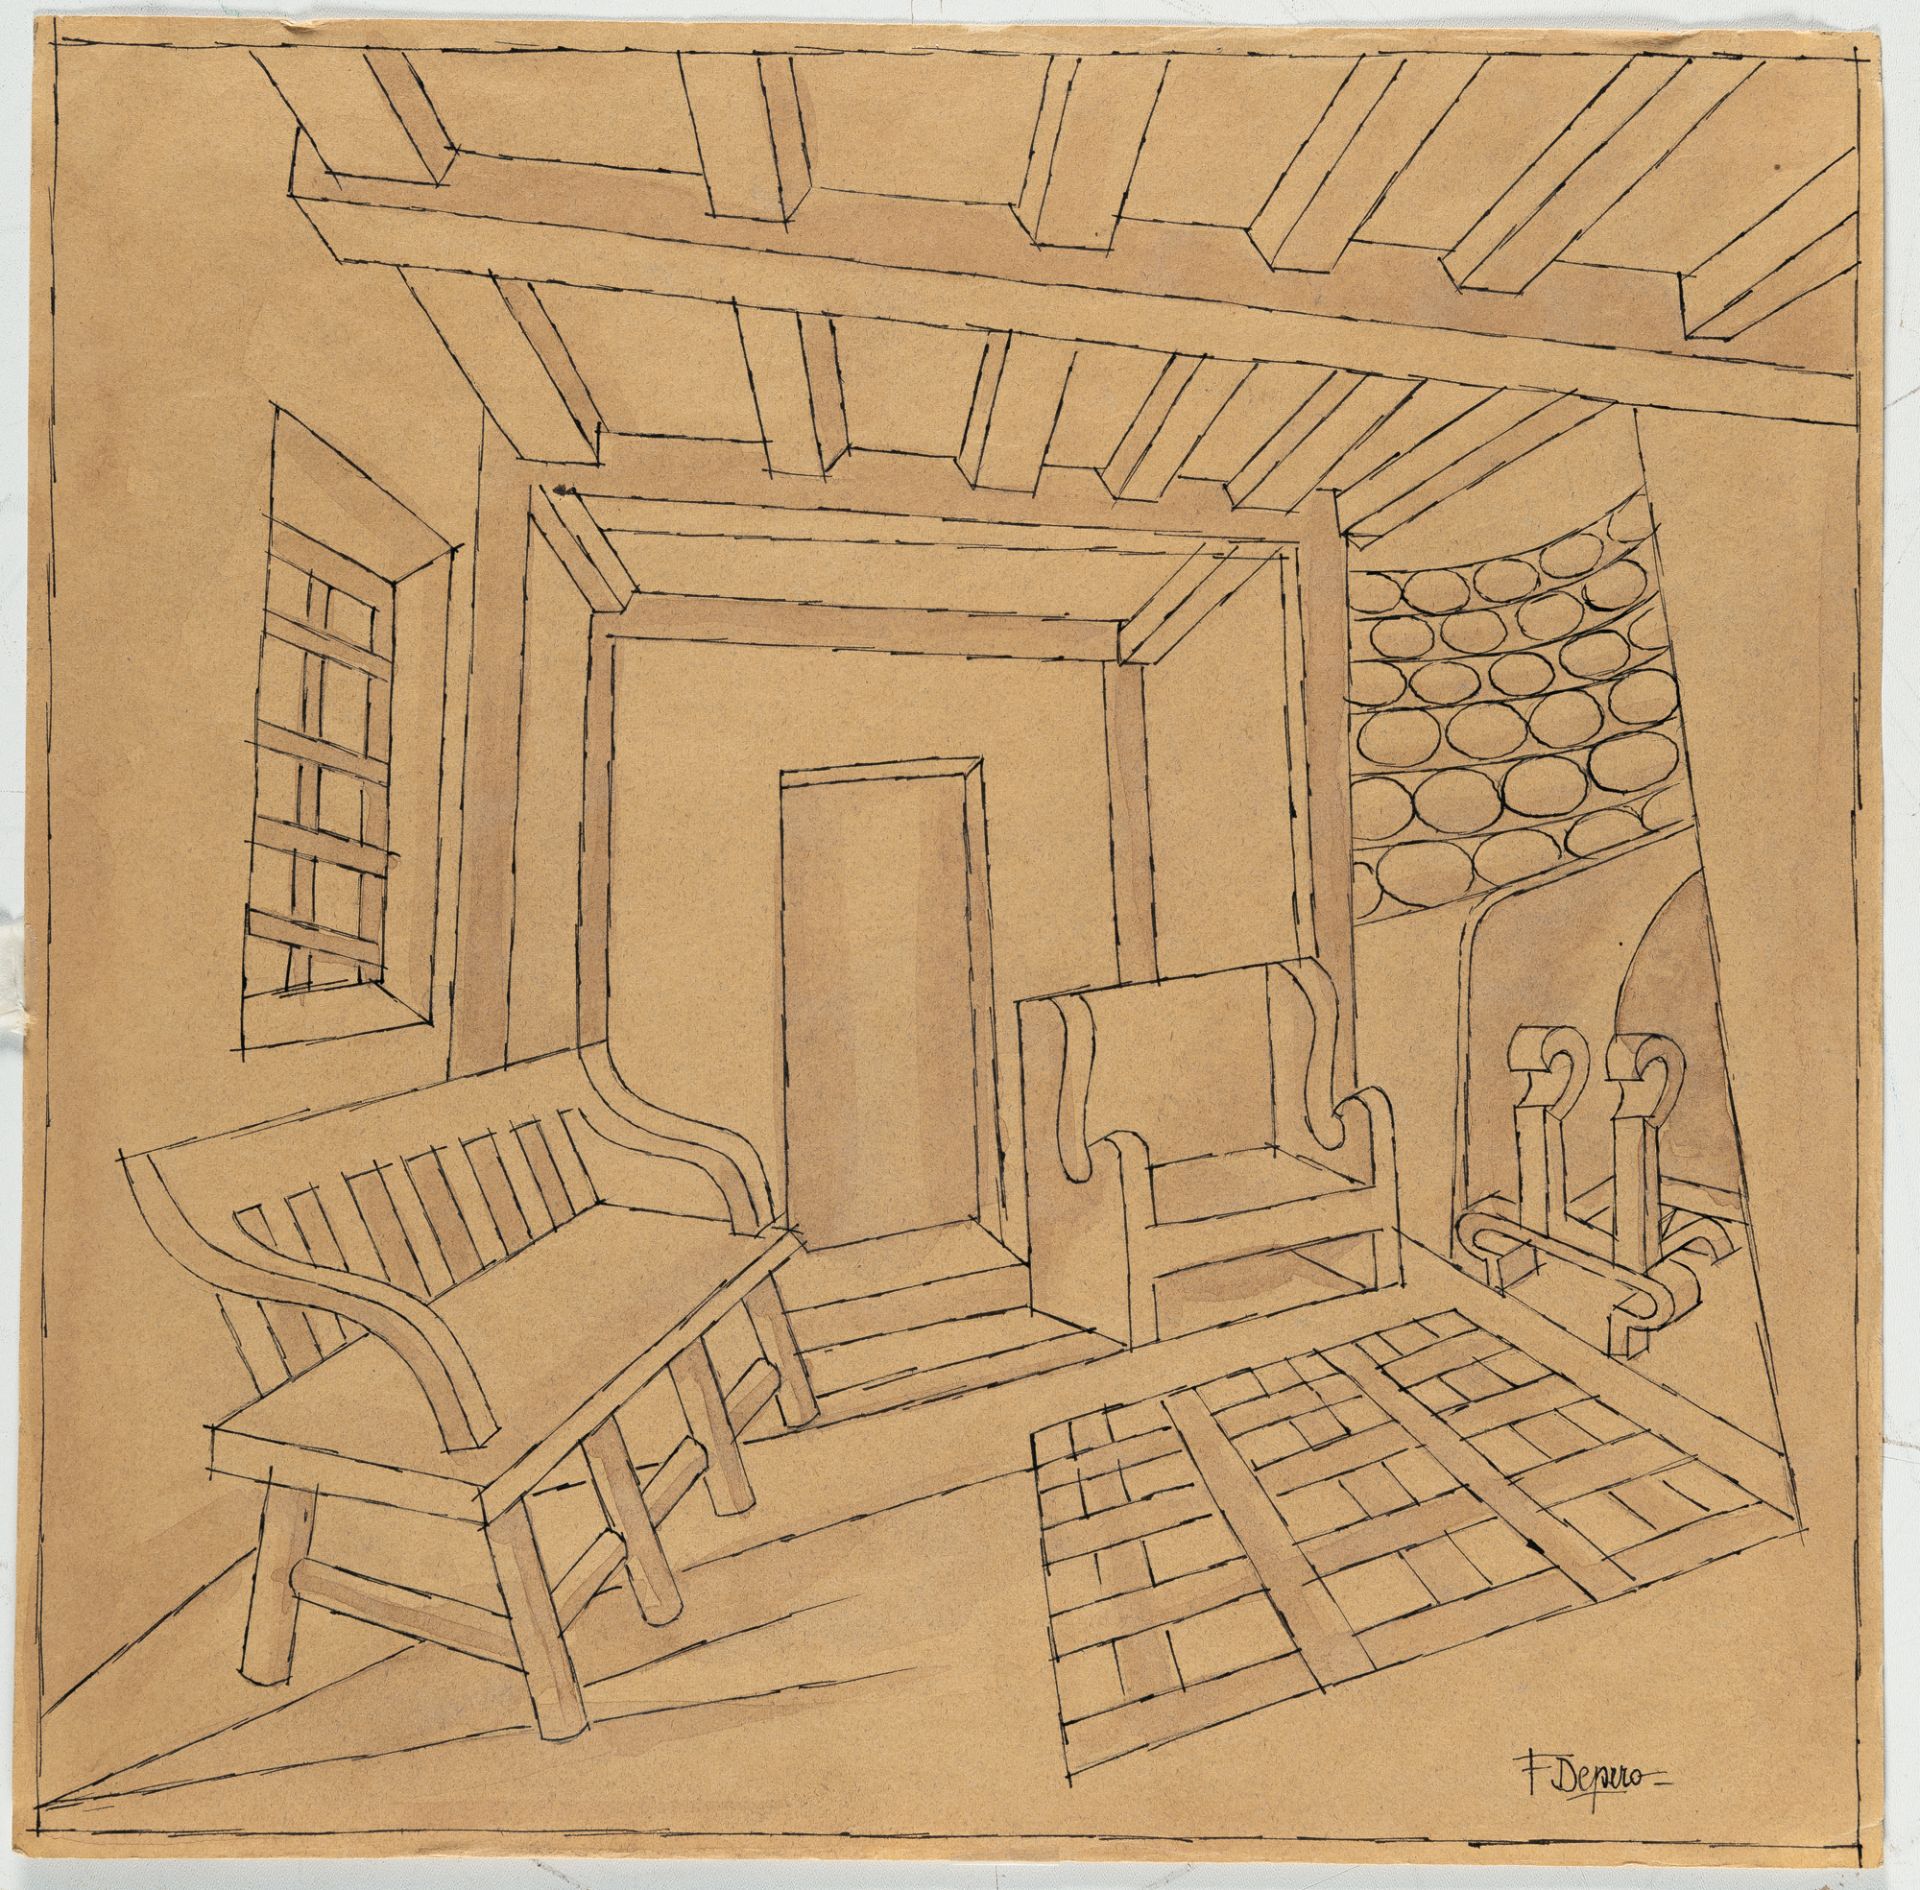 Fortunato Depero, Interno.Indian ink and watercolour on brownish wove. (Ca. 1940). Ca. 34 x 34 cm. - Image 2 of 5